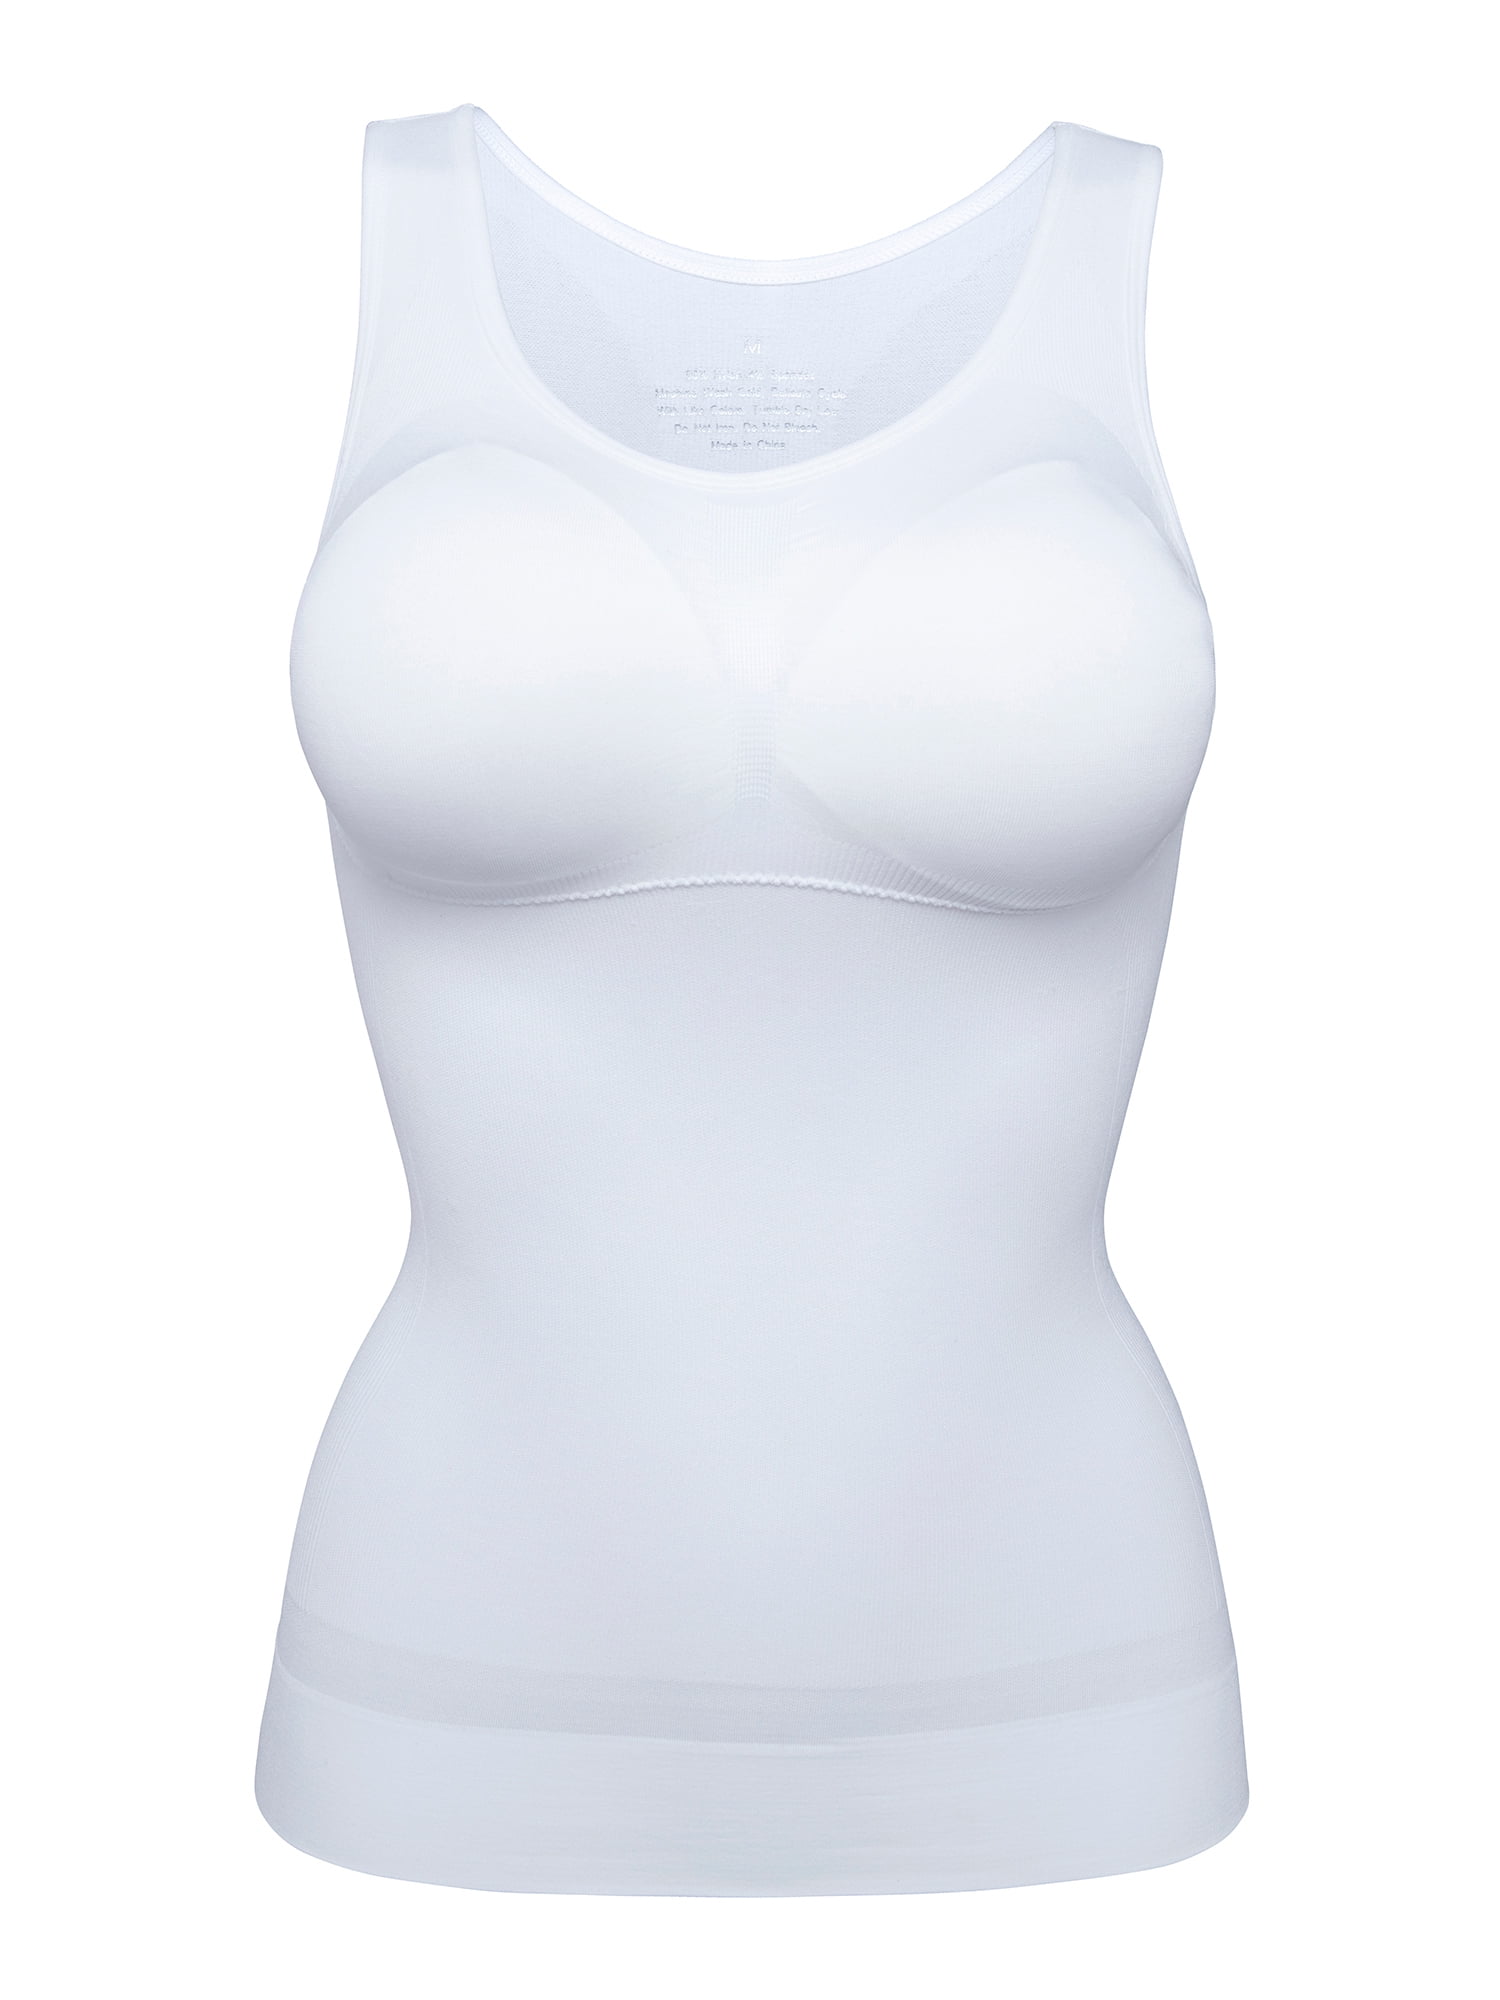 Compression Tank Top Shapewear for Women with Tummy Control